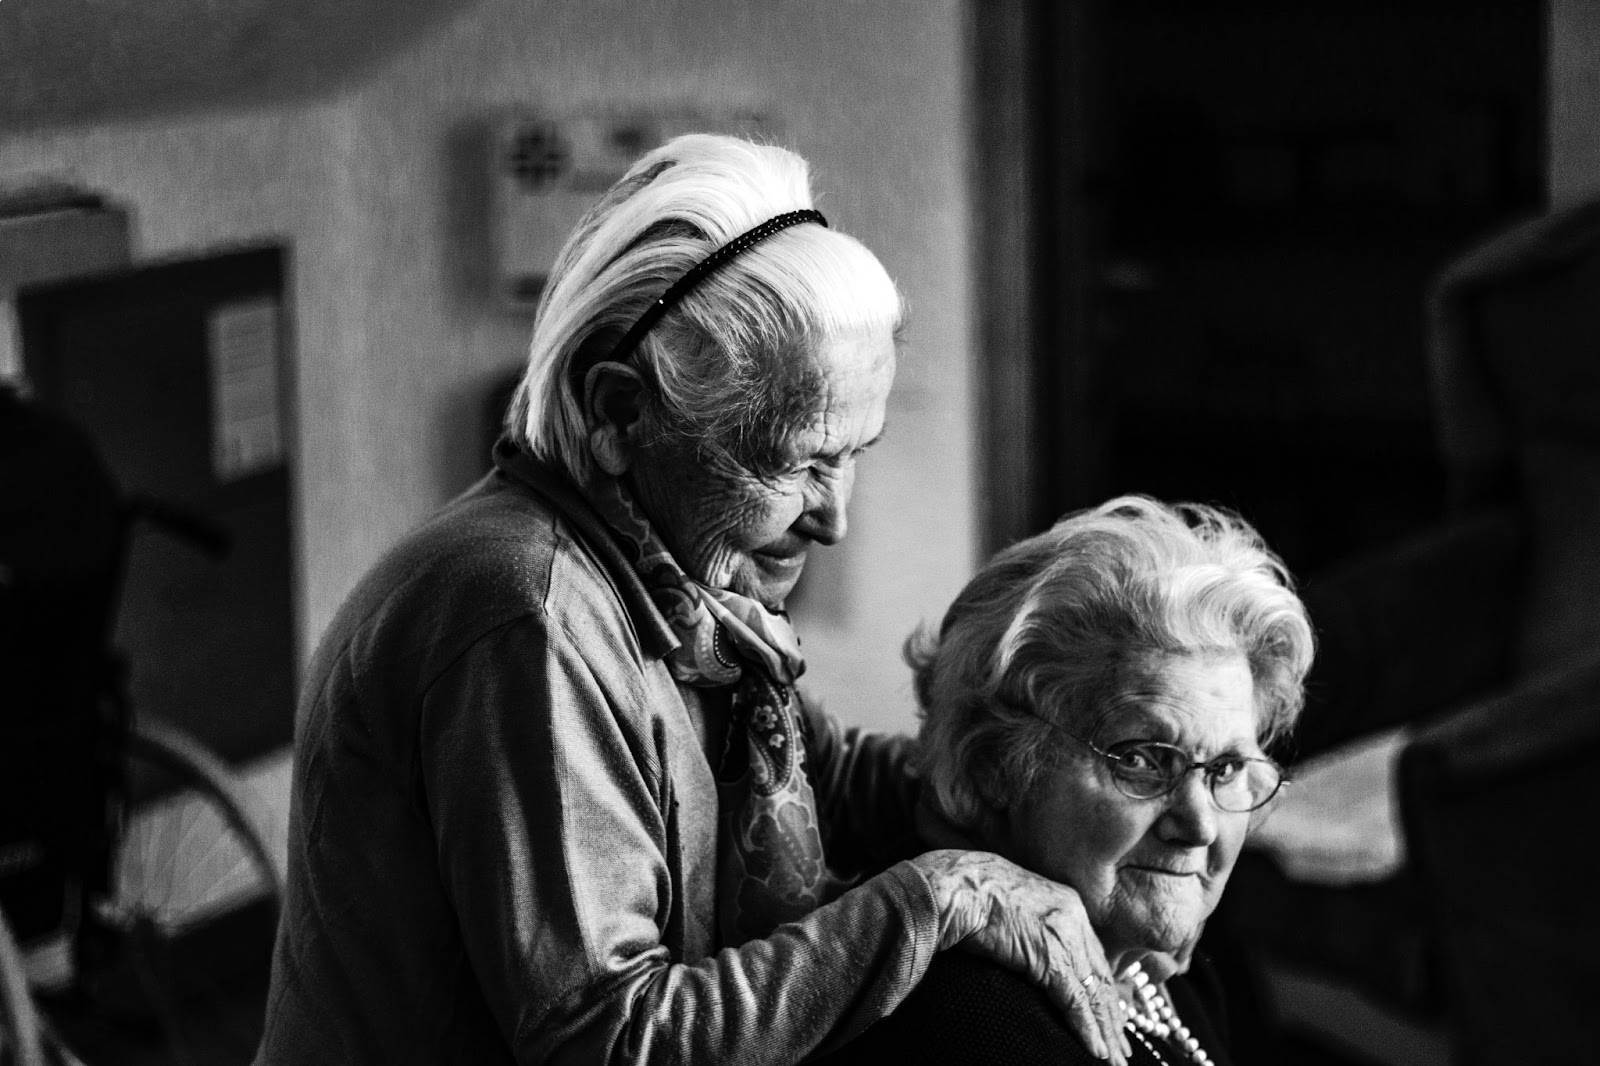 Two older women, one has her hands on the other's shoulders and is smiling.